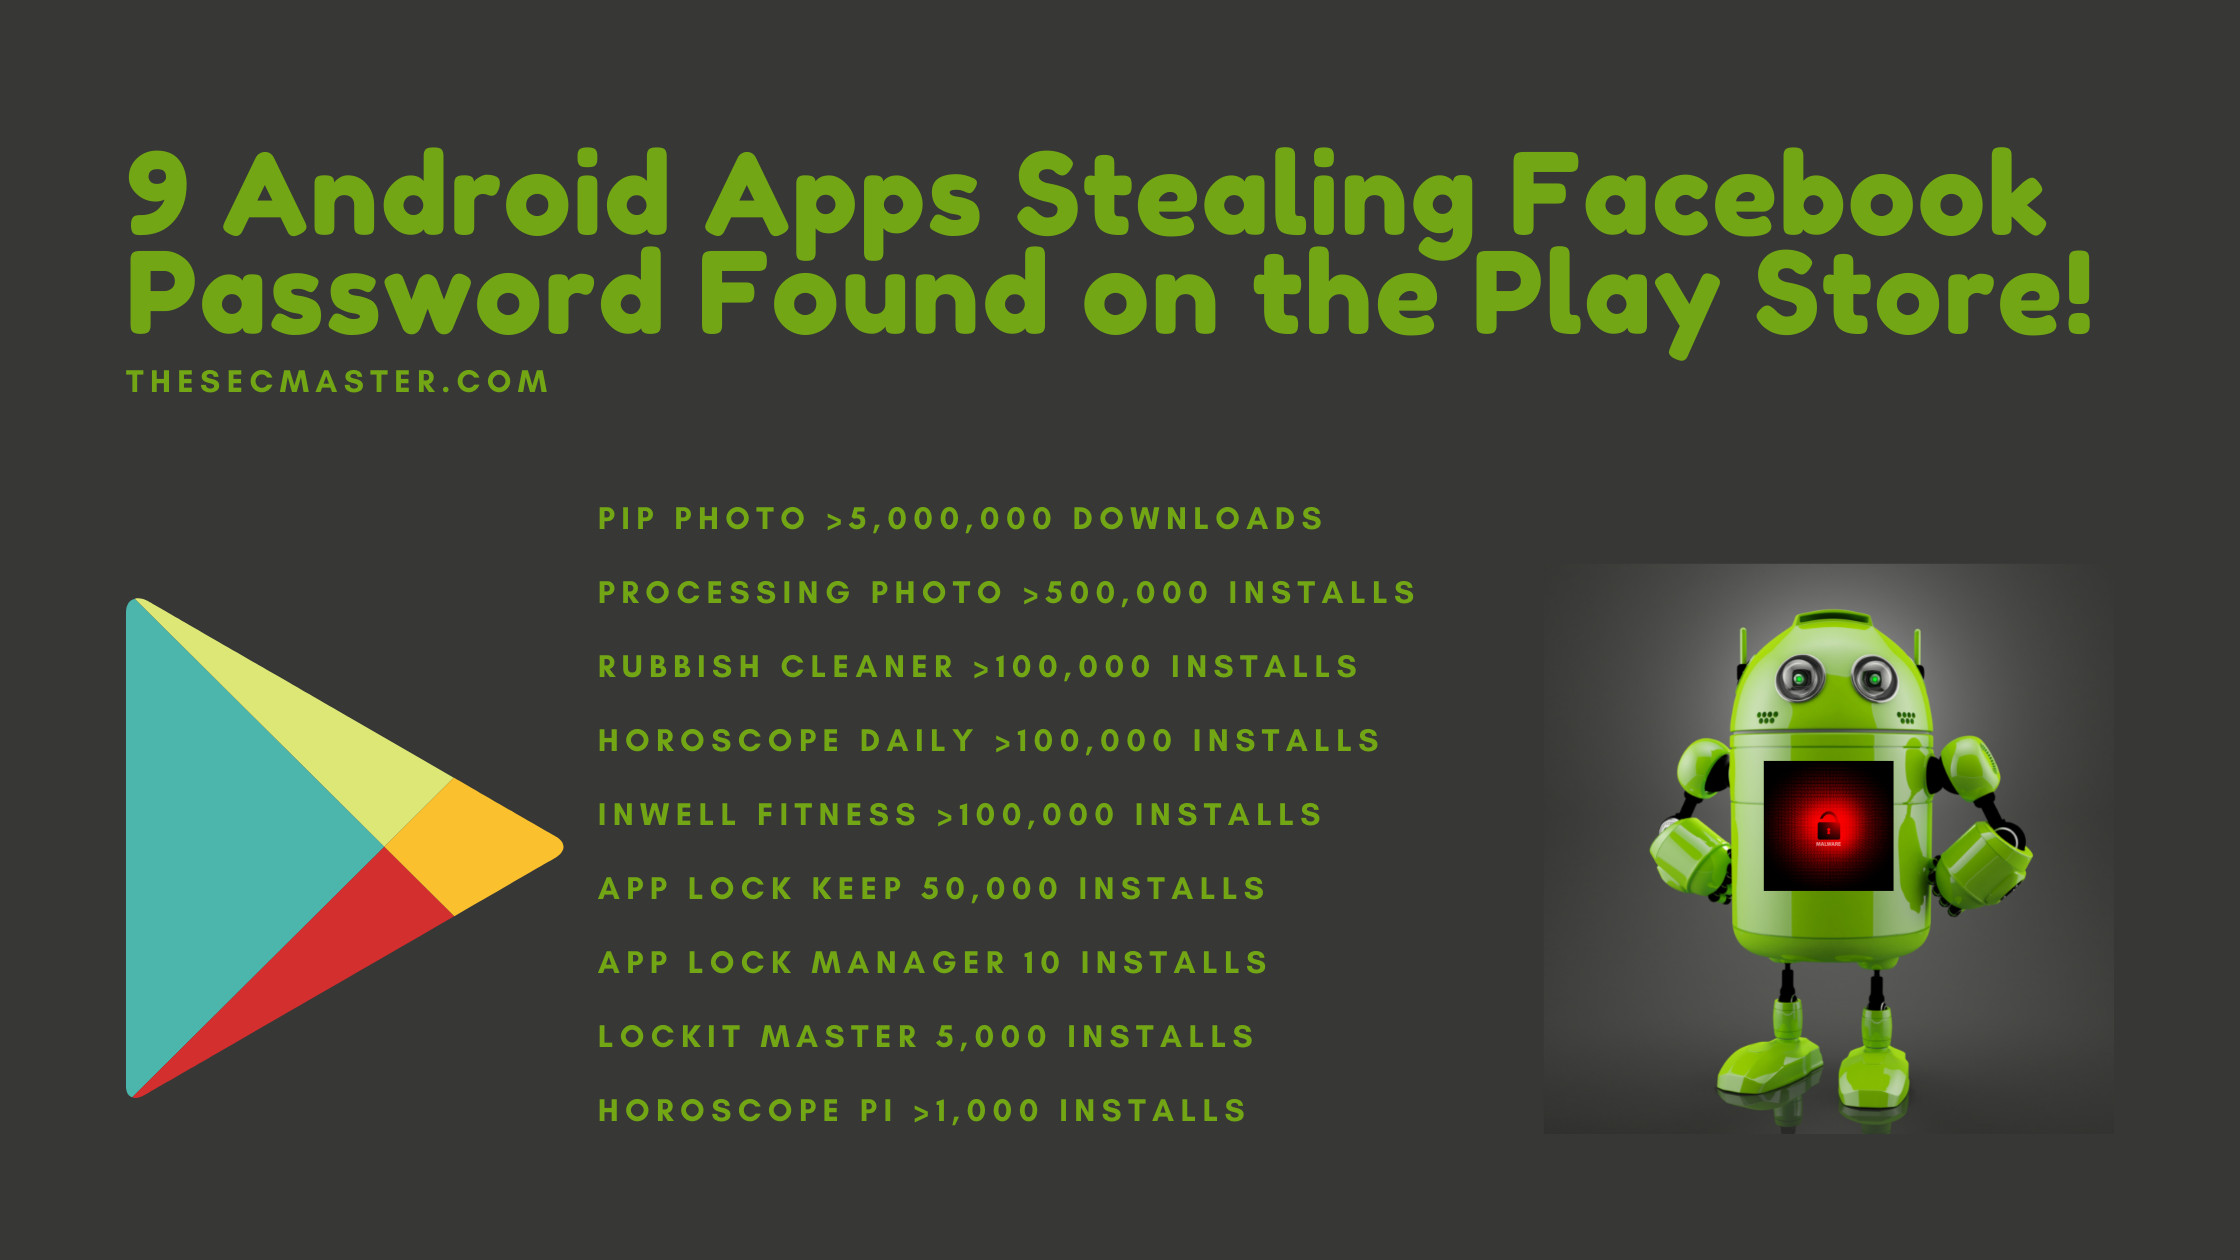 9 Android Apps Stealing Facebook Password Found On The Play Store